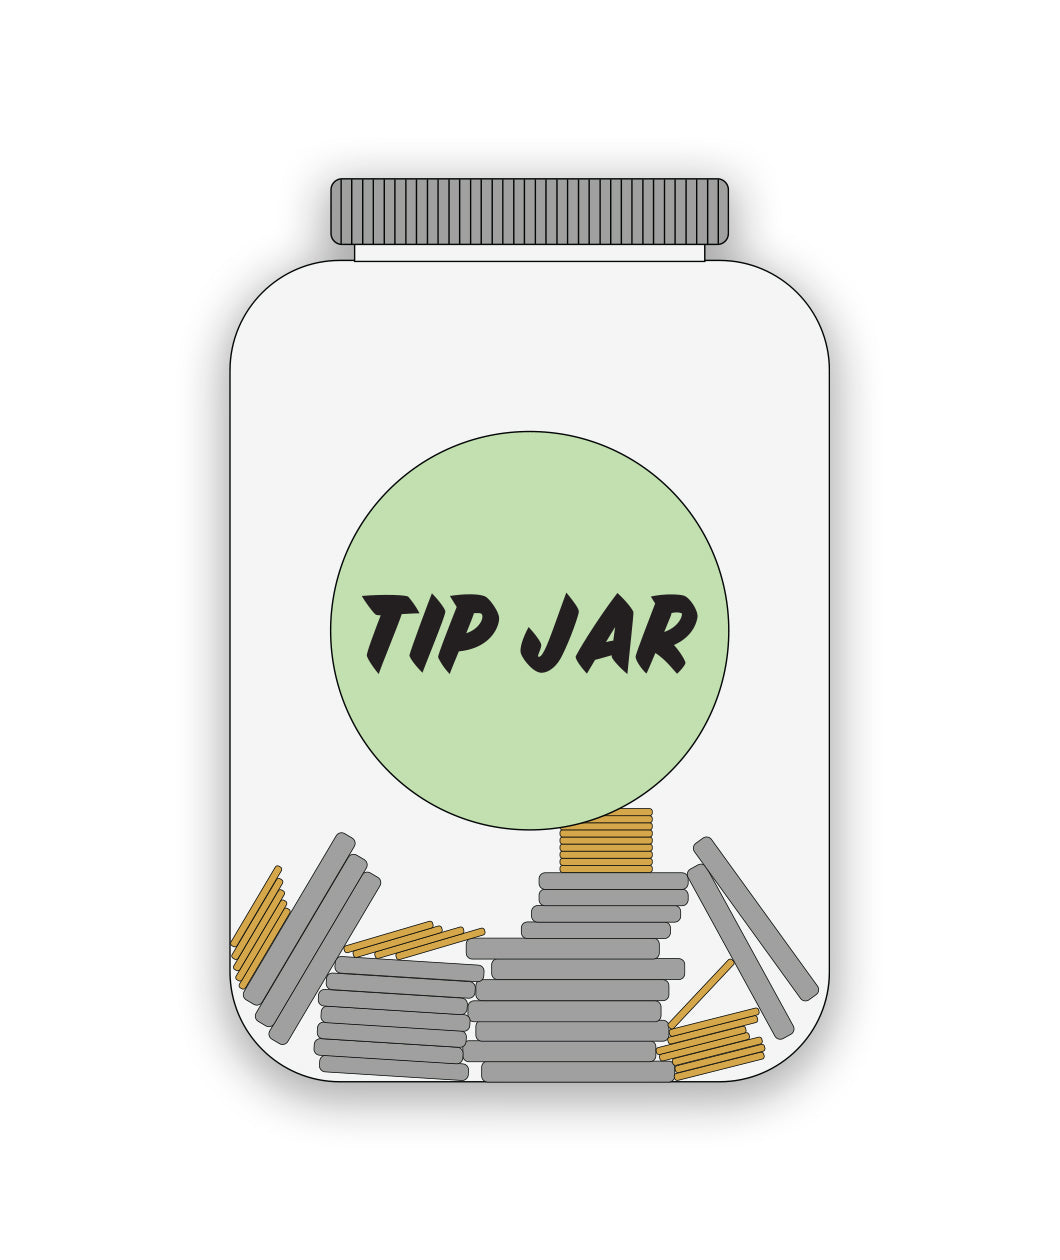 A drawing of a cylindrical jar with silver and gold coins inside and a green circle with the words 